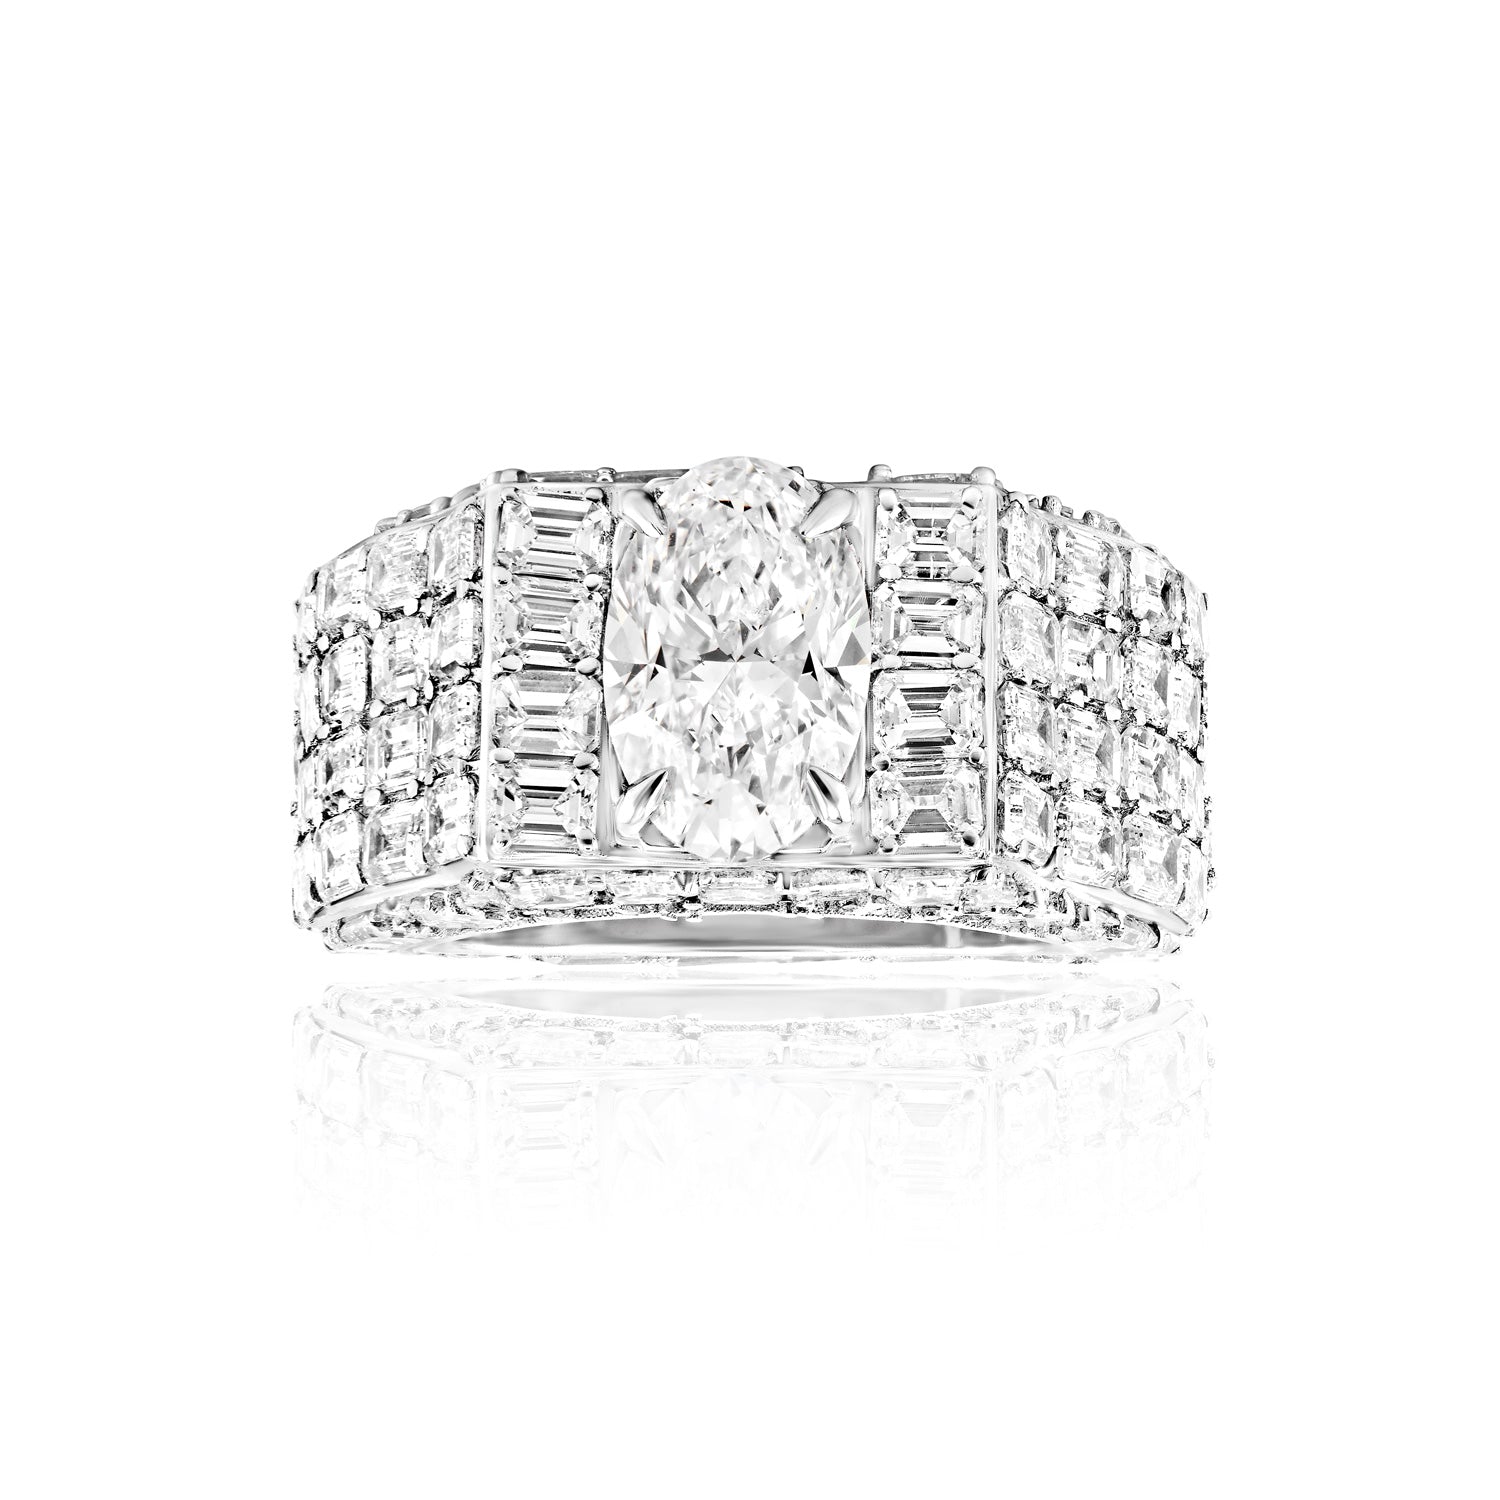 Marisol 16 Carats E* VS2 Oval Cut Diamond Chandelier Ring Front View